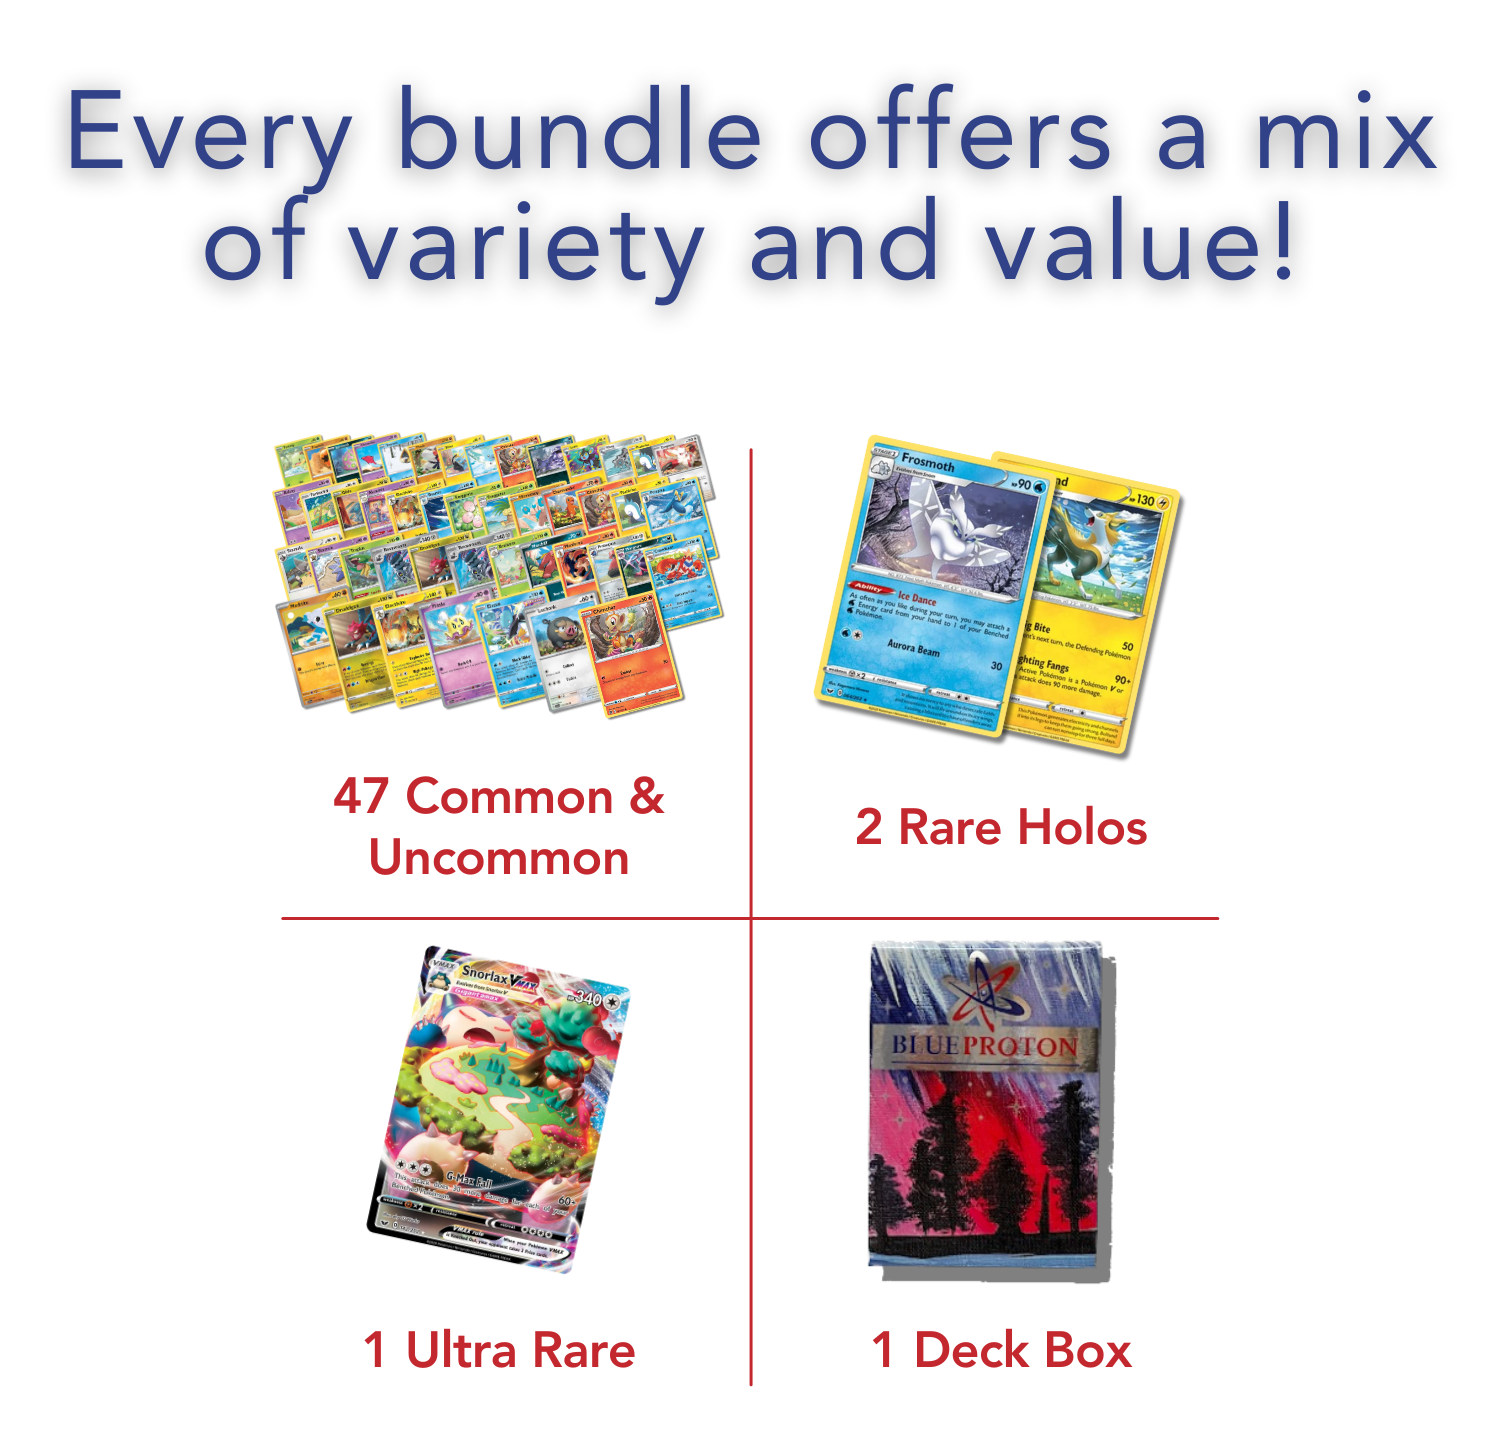 Exclusive Premium Bundle | 50 Genuine Cards | Includes 1 Guaranteed Ultra Rare: Legendary, VSTAR, VMAX, V, GX, or EX | Plus 2 Holos or Rares | BlueProton Deck Box compatible with trading cards